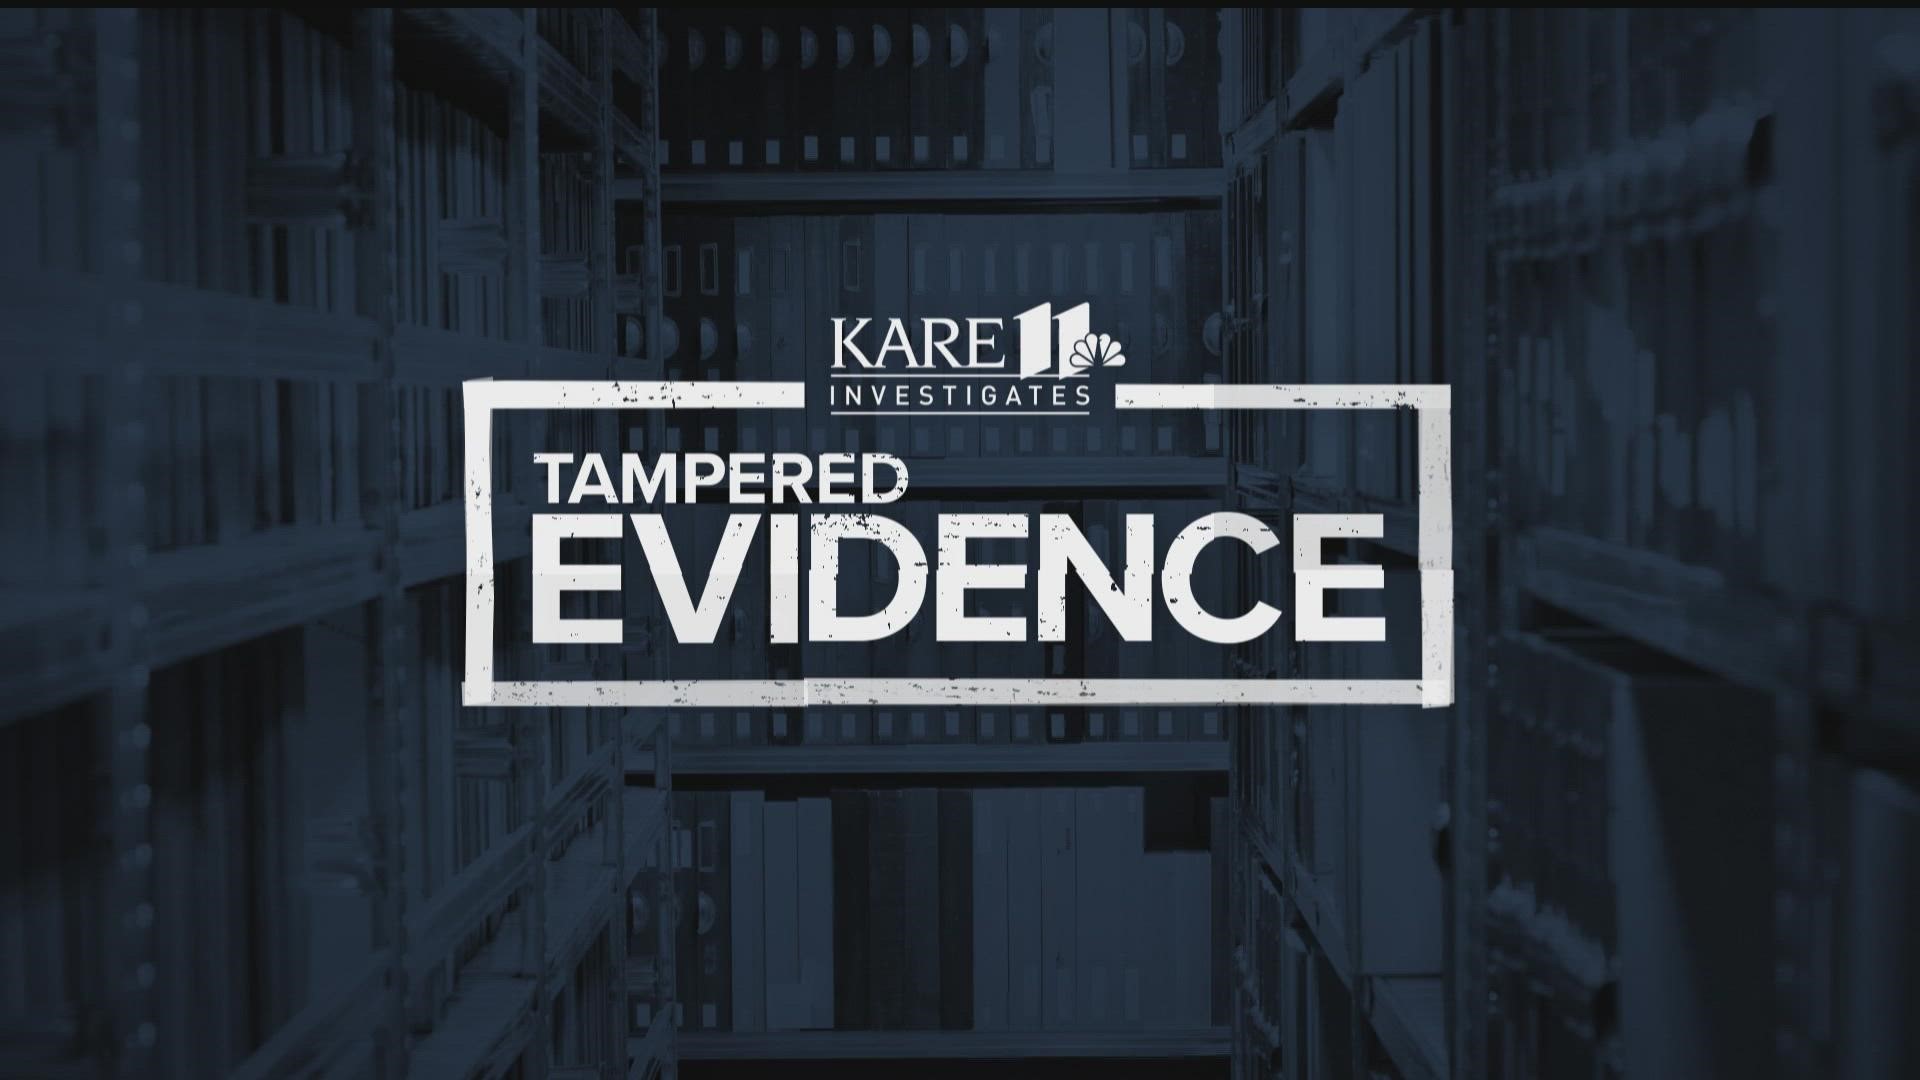 Watching TV behind bars, a man uses a KARE 11 investigation about a crooked cop to help clear his name.